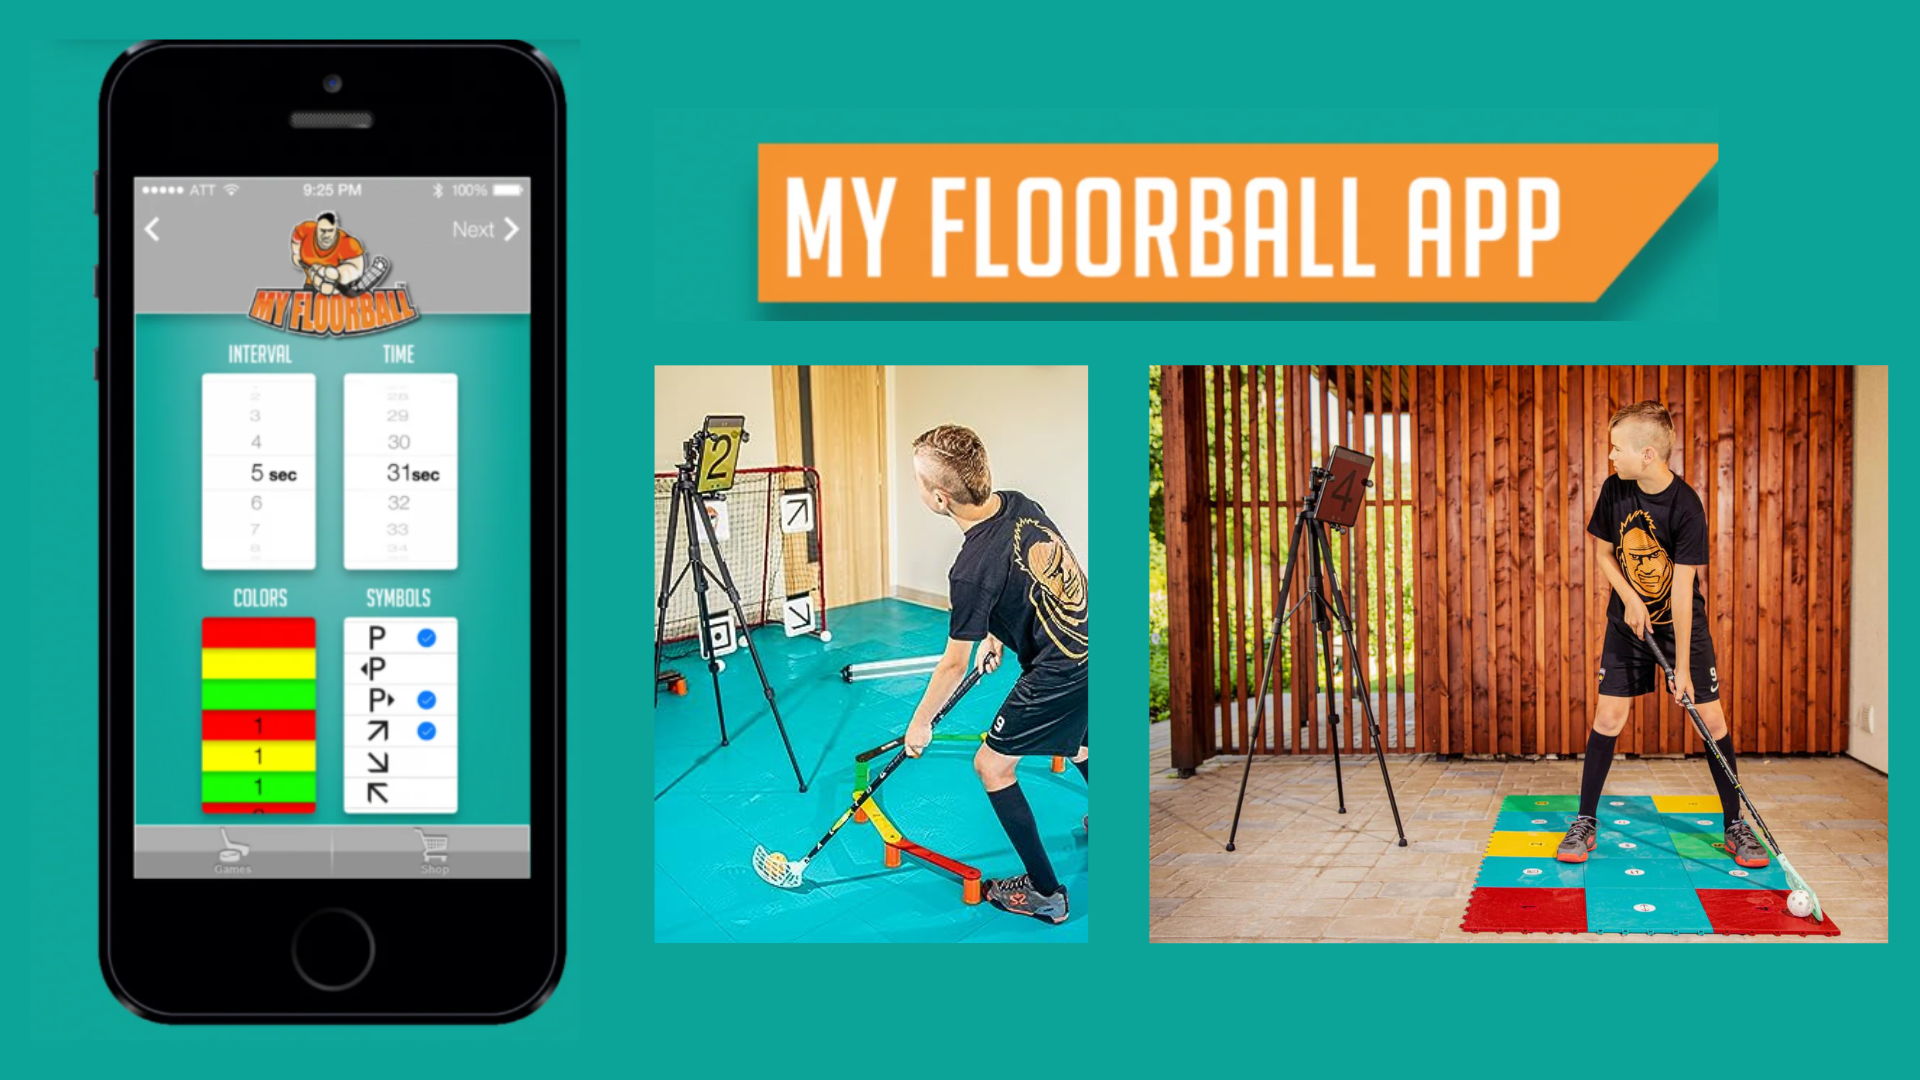 Stay injury - free with the My Floorball App: Your Guide to Safe Training